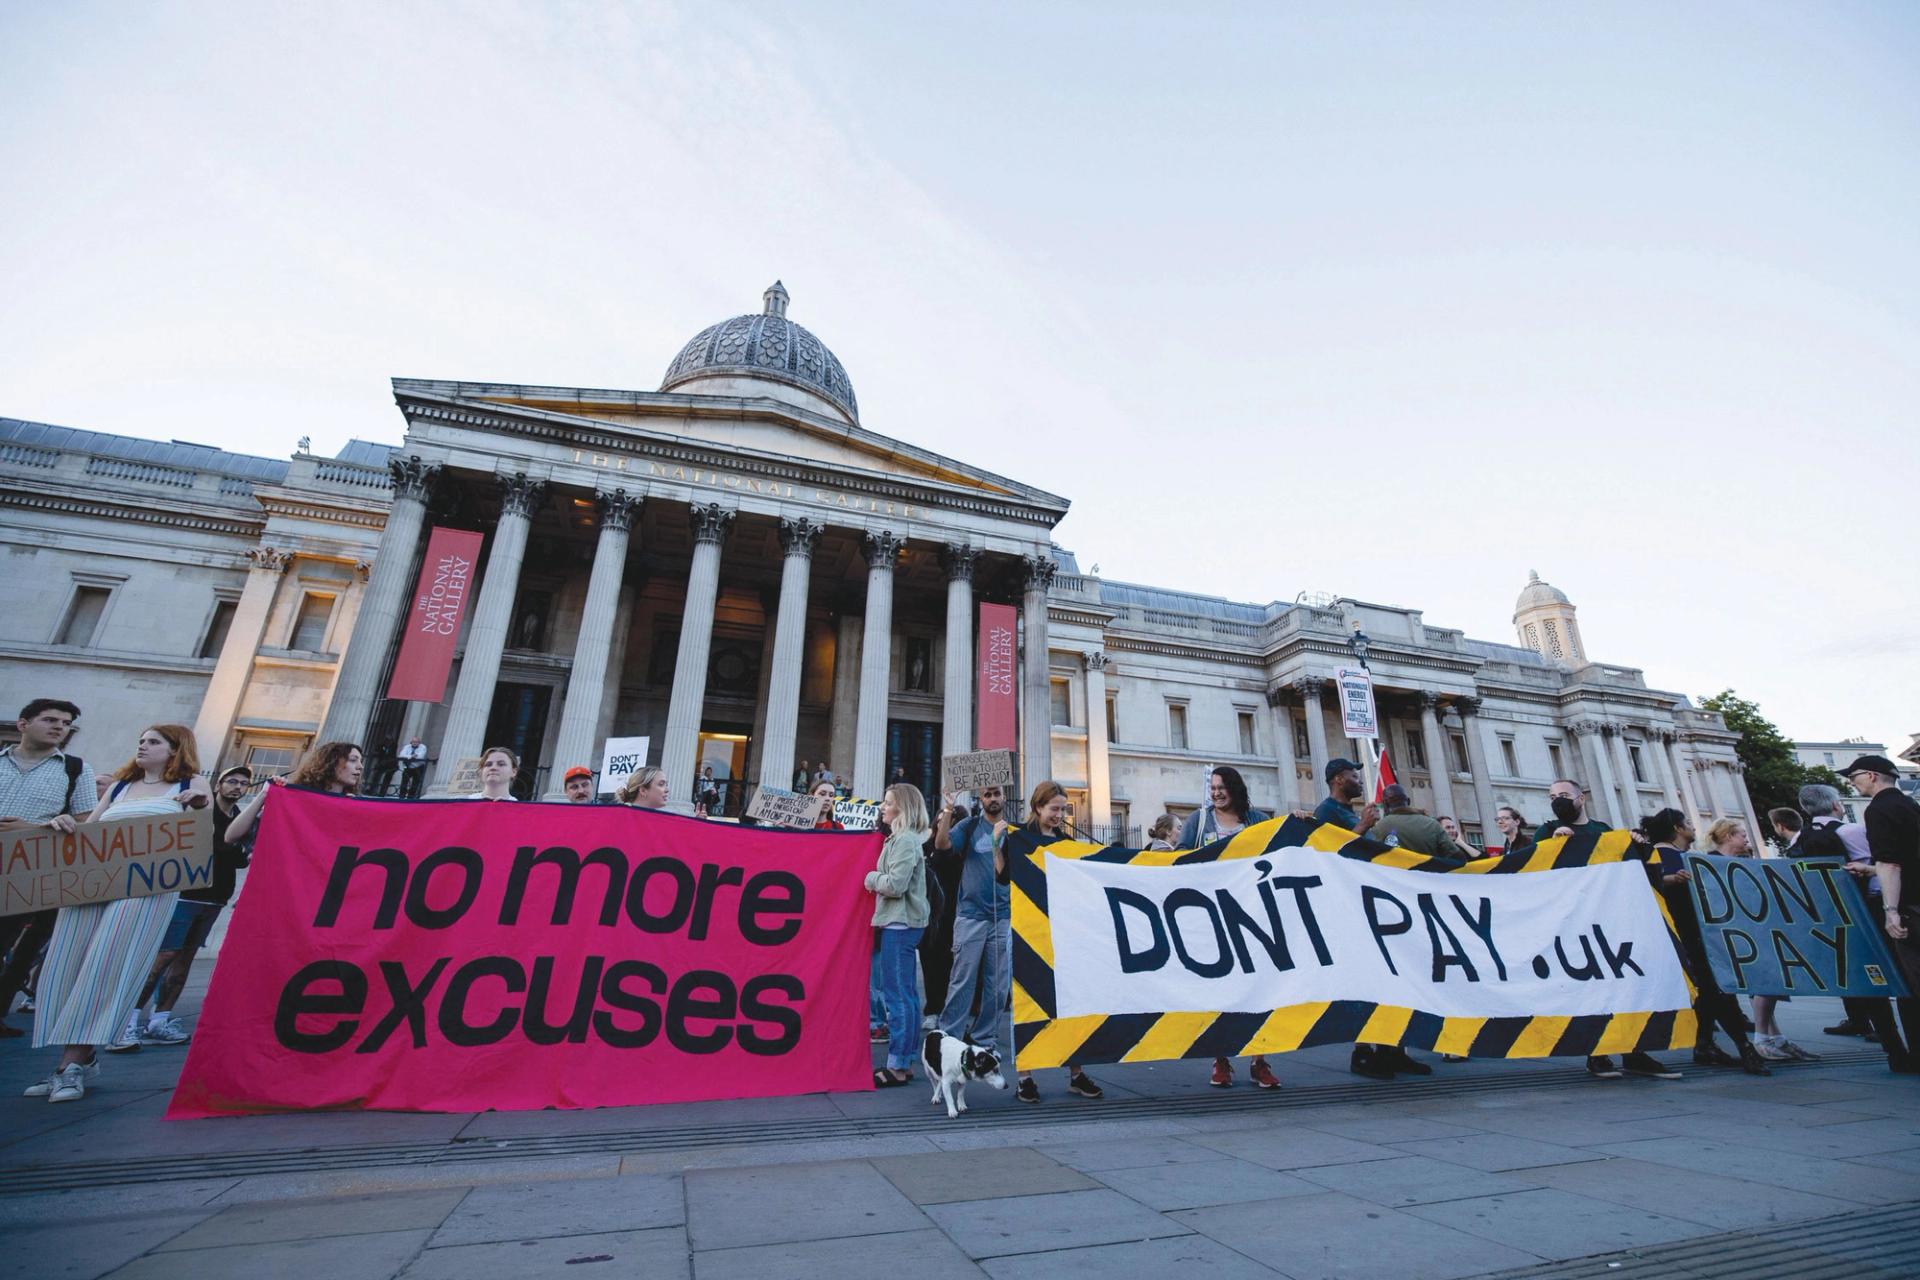 Protesters from the Don’t Pay campaign in front of the National Gallery in London’s Trafalgar Square on the day Liz Truss became Prime Minister. In response to spiralling costs, the group is urging people to stop paying bills until gas and electricity prices are more affordable

Photo: Hesther Ng/SOPA Images/Sipa USA



